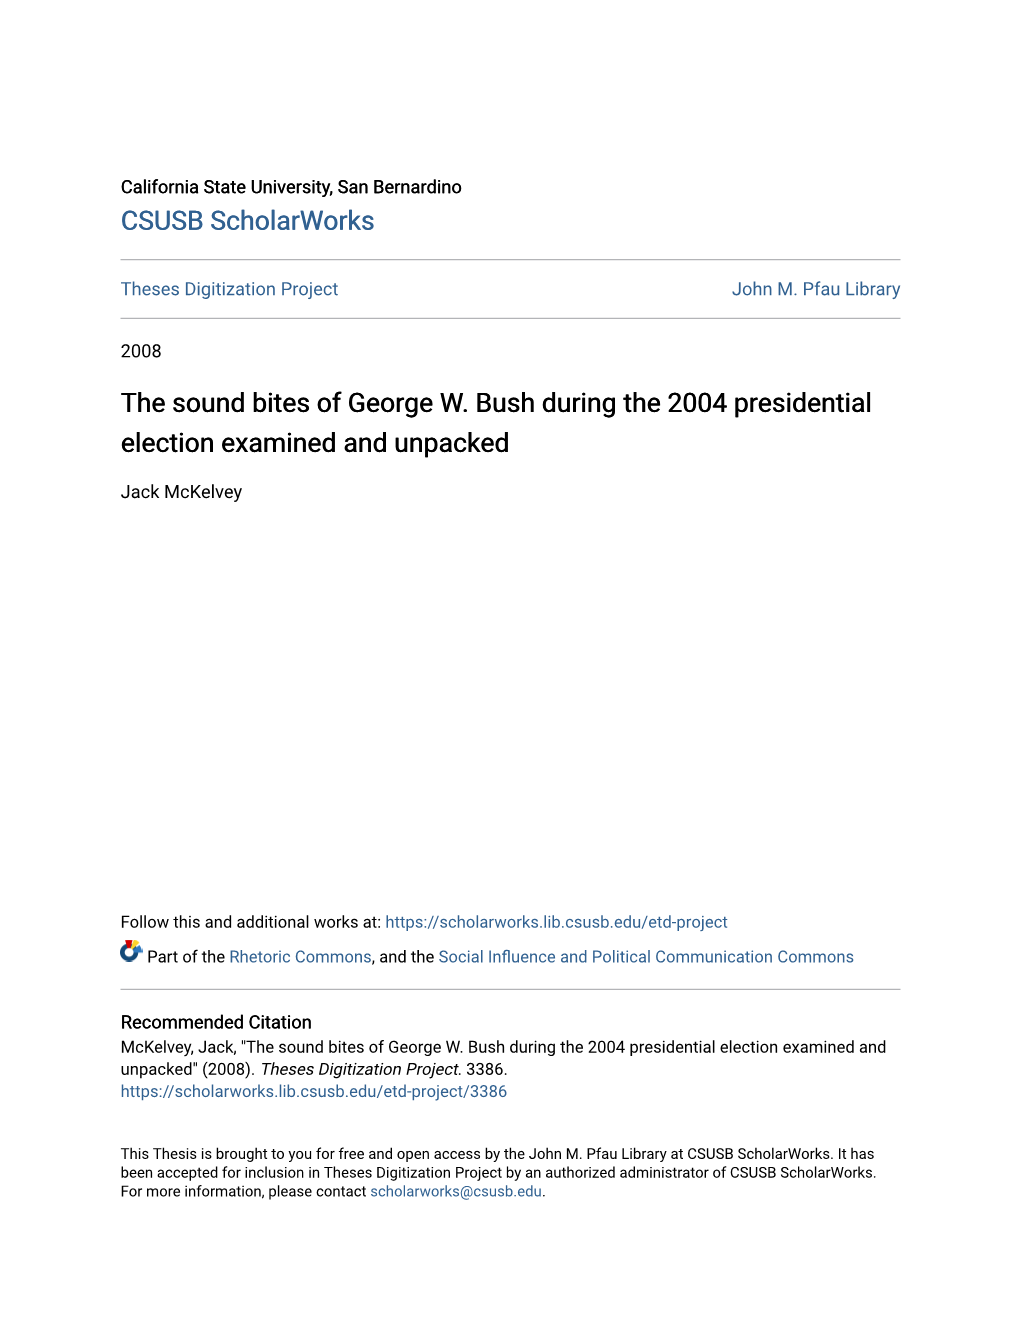 The Sound Bites of George W. Bush During the 2004 Presidential Election Examined and Unpacked